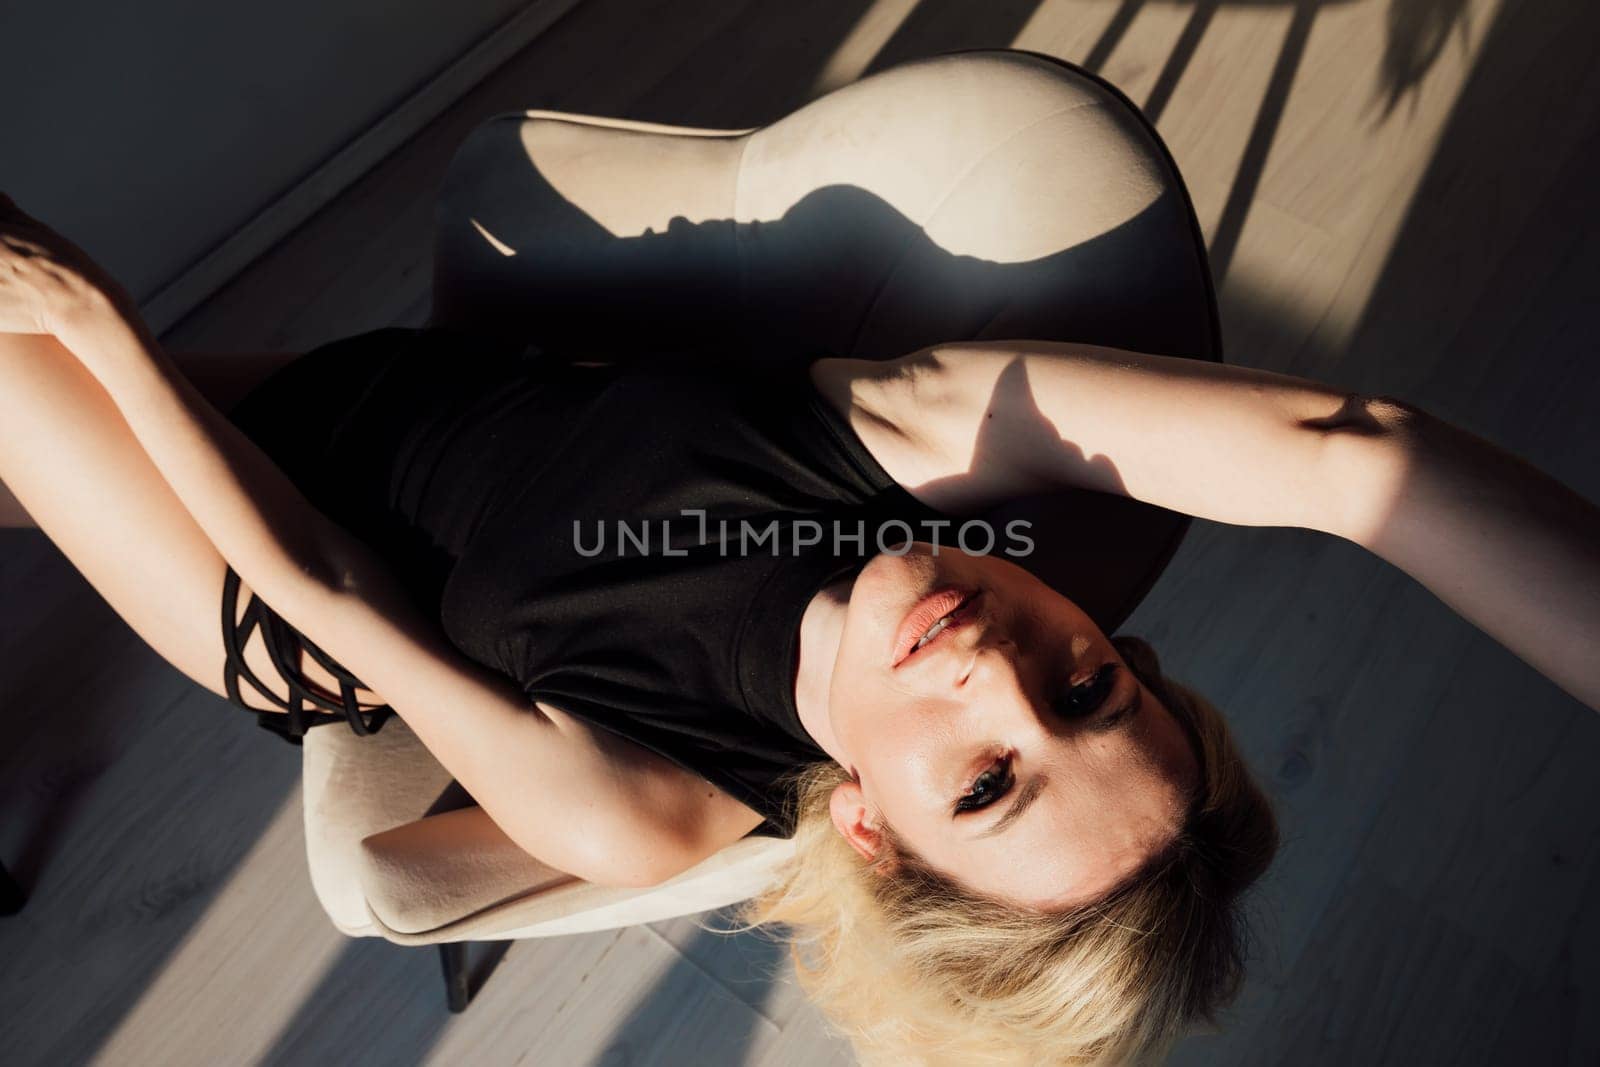 blonde woman in a black sexy dress sits in a chair in a dark room